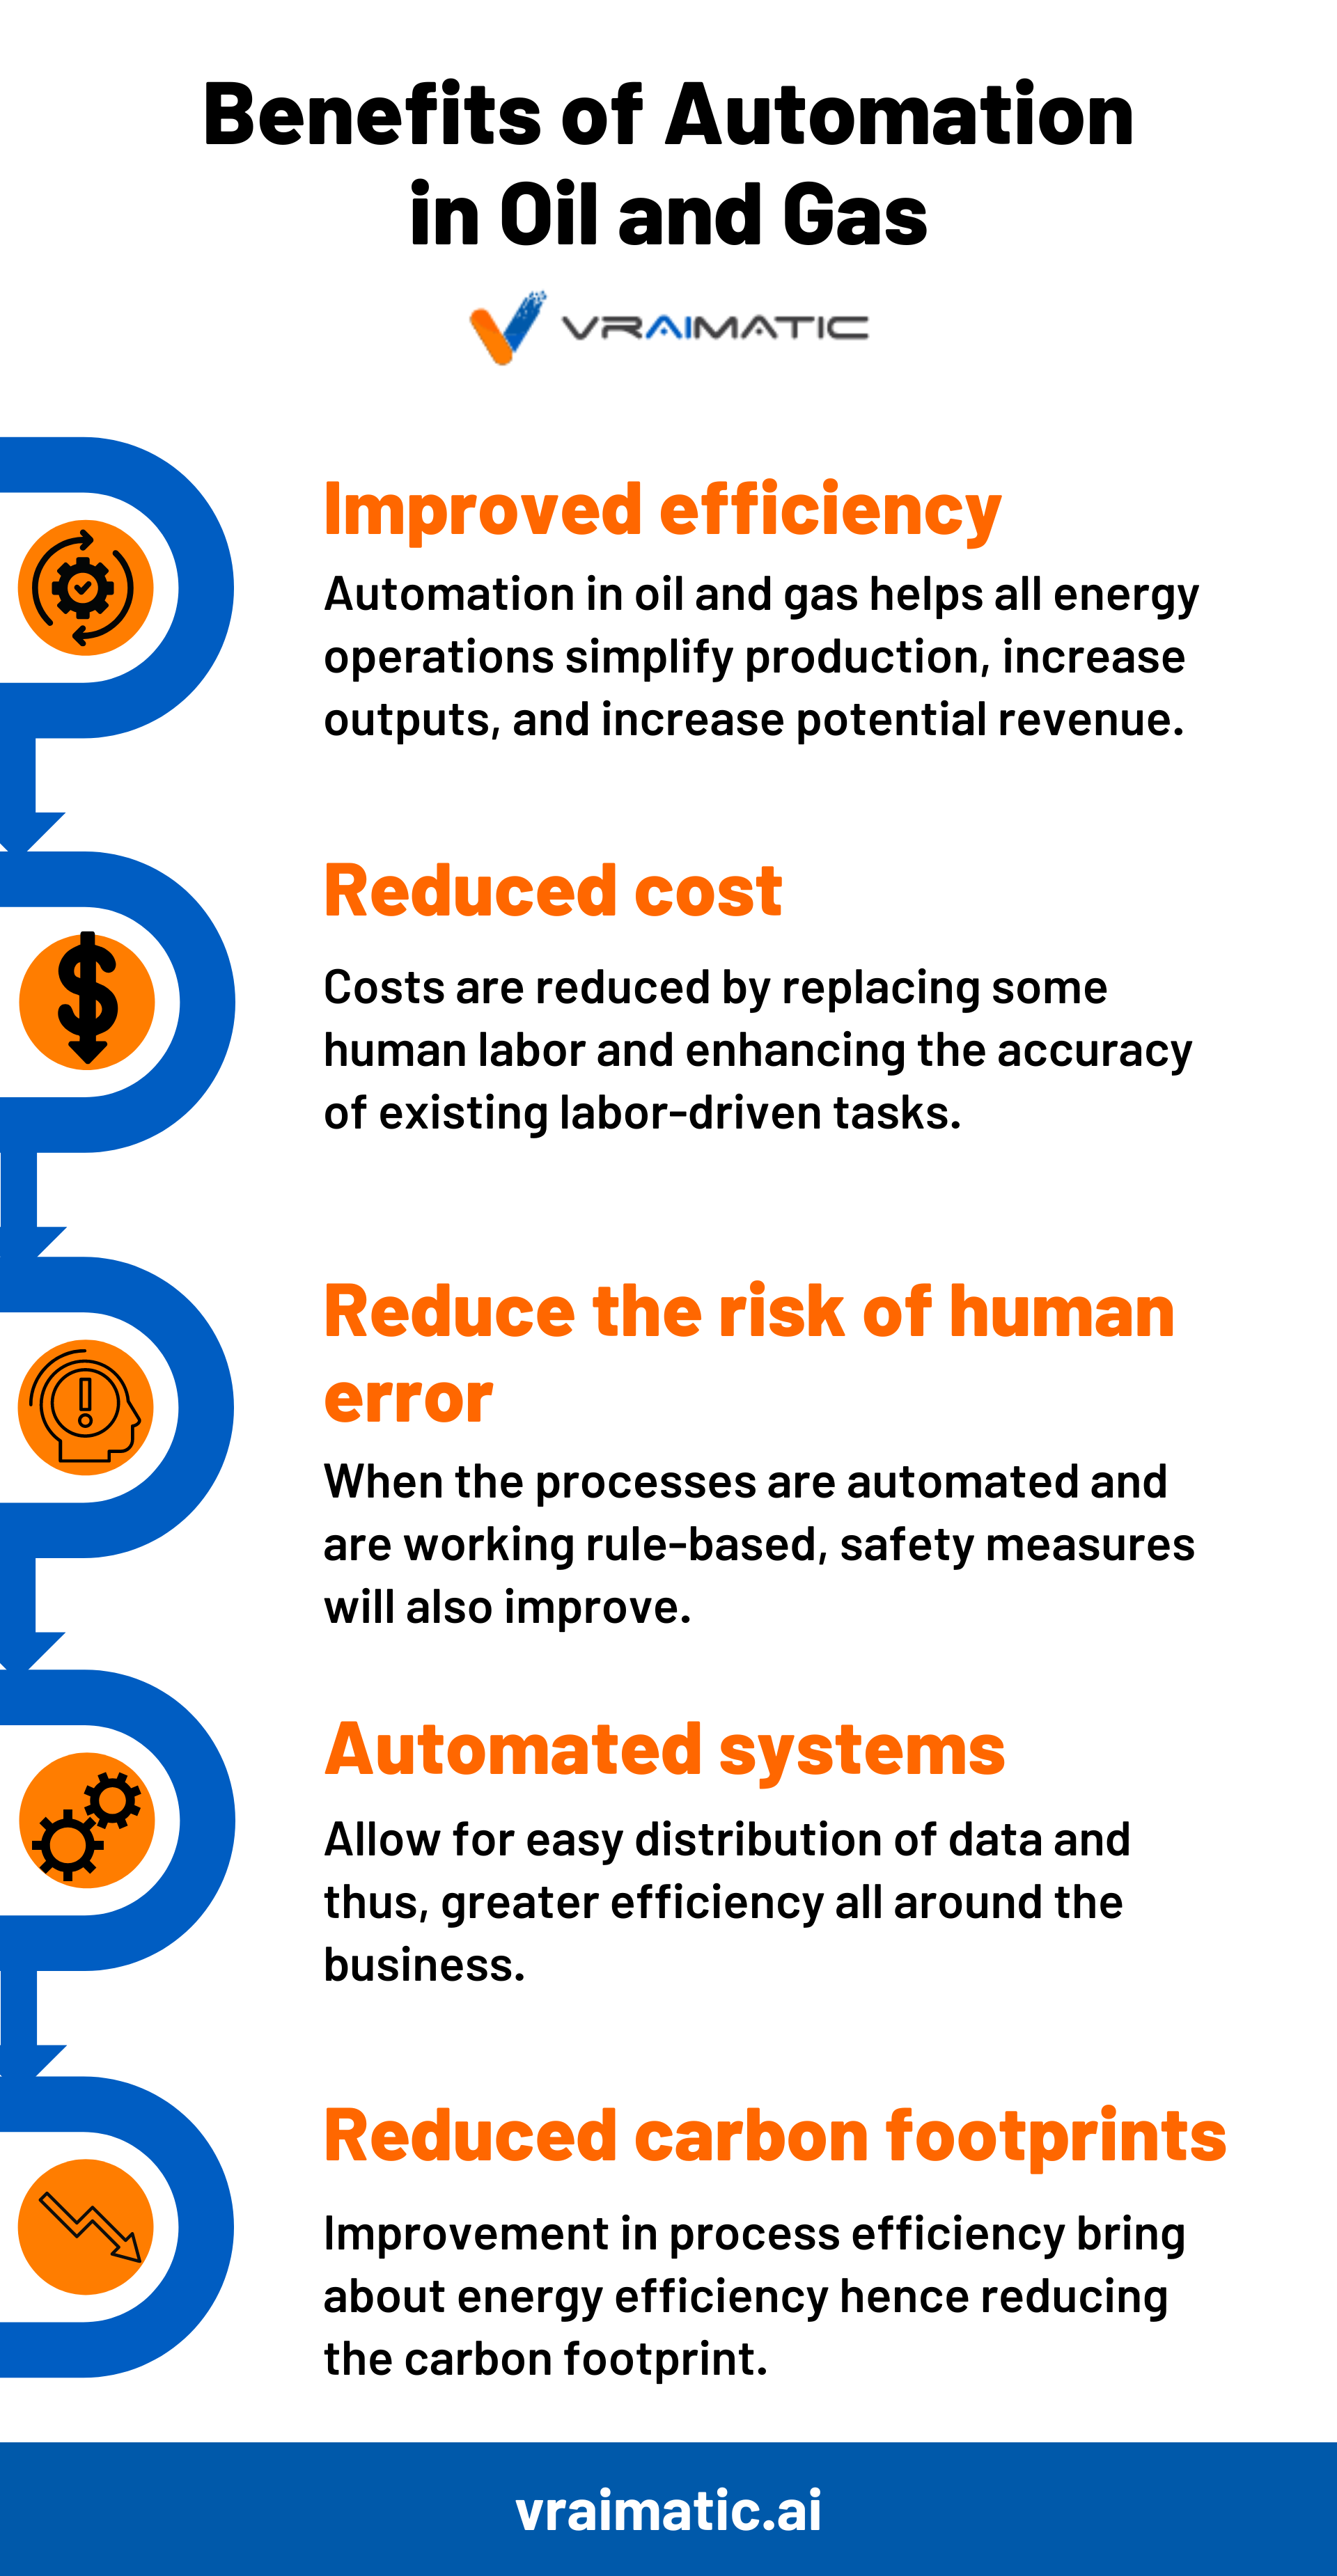 Benefits of RPA in Oil and Gas Automation